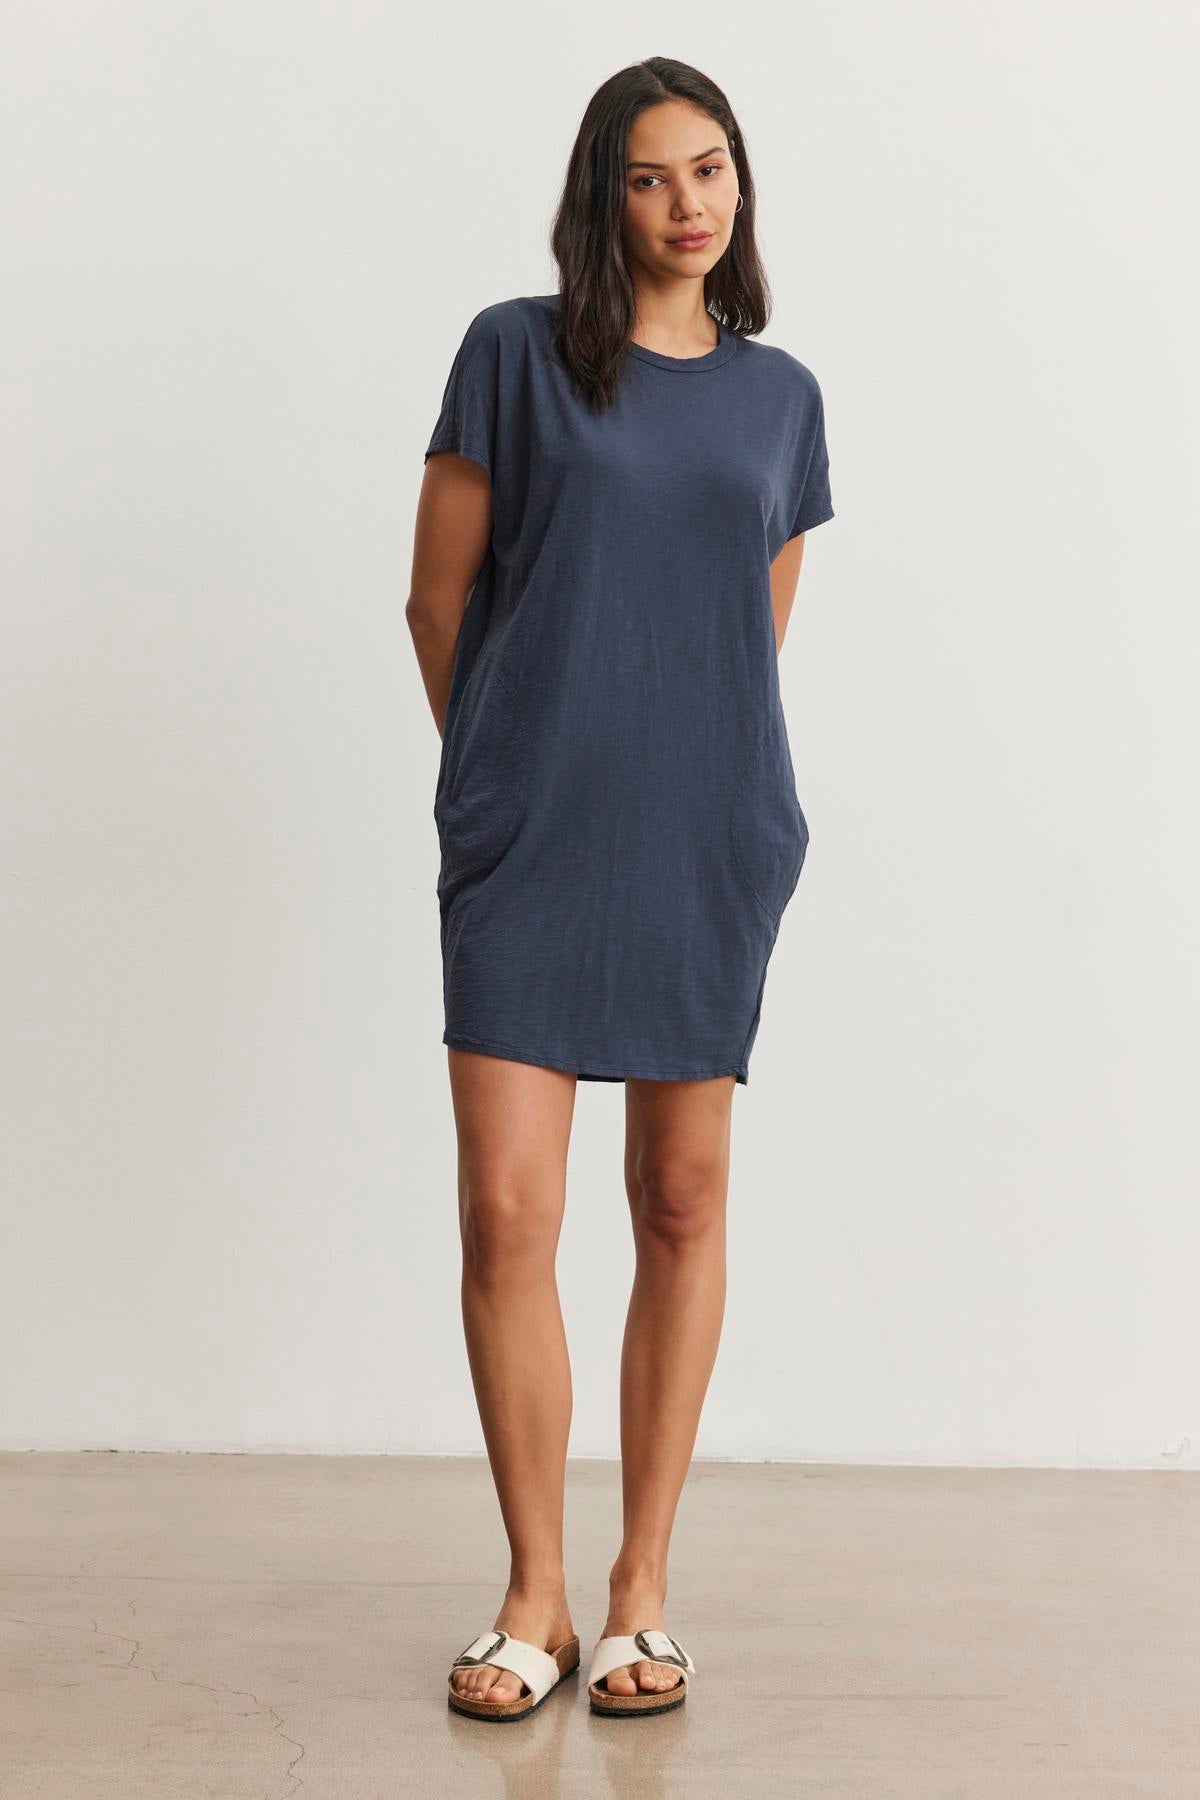   A person with long hair stands wearing a relaxed fit, short-sleeve blue ATHENA DRESS by Velvet by Graham & Spencer with hands in pockets and white sandals, against a plain white background. 